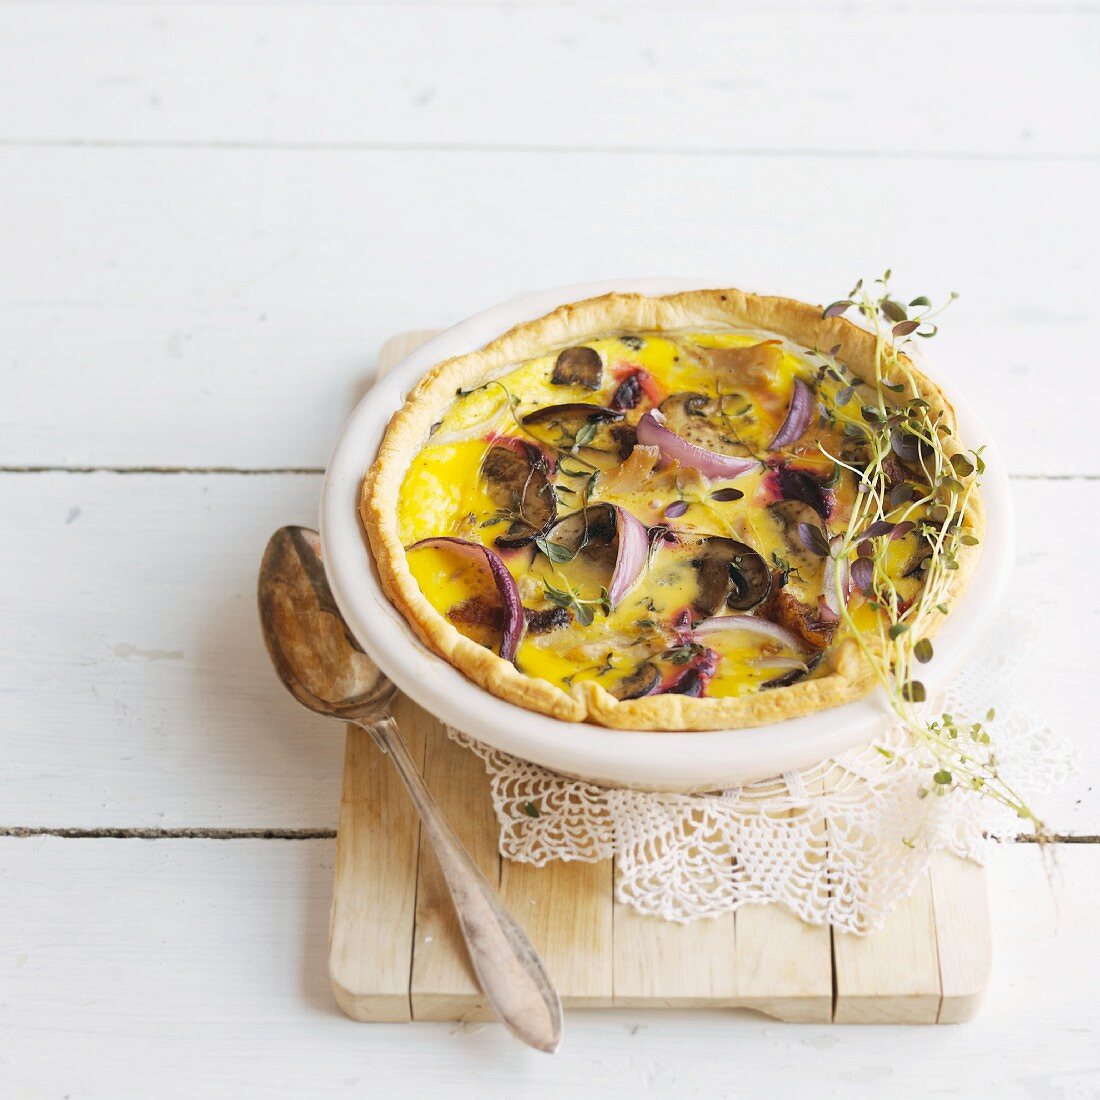 Chicken pie with red onions and mushrooms